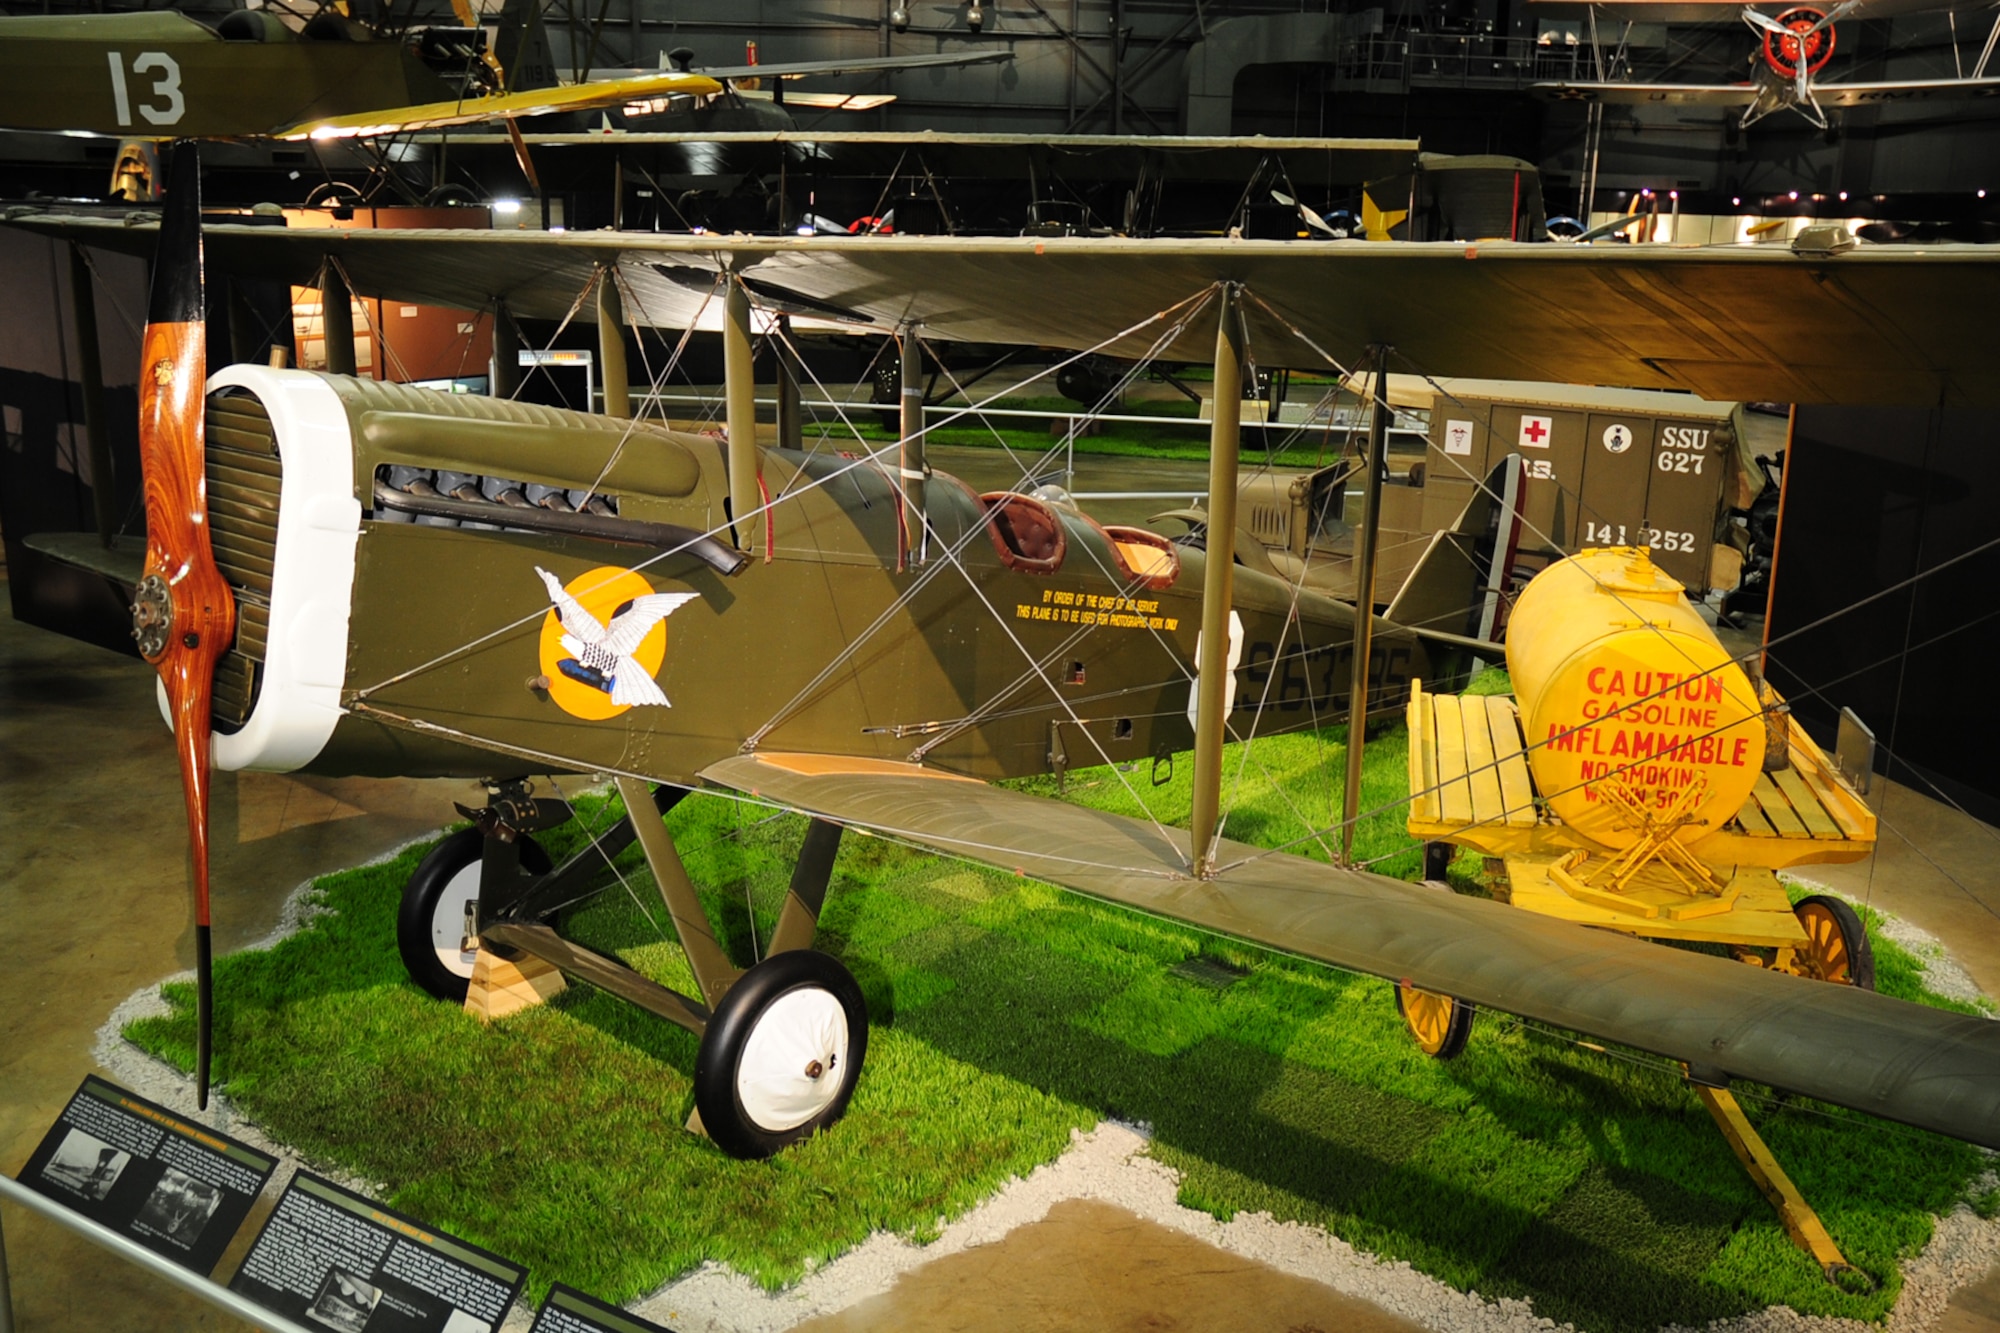 DAYTON, Ohio -- De Havilland DH-4 in the Early Years gallery at the National Museum of the U.S. Air Force. (U.S. Air Force photo)